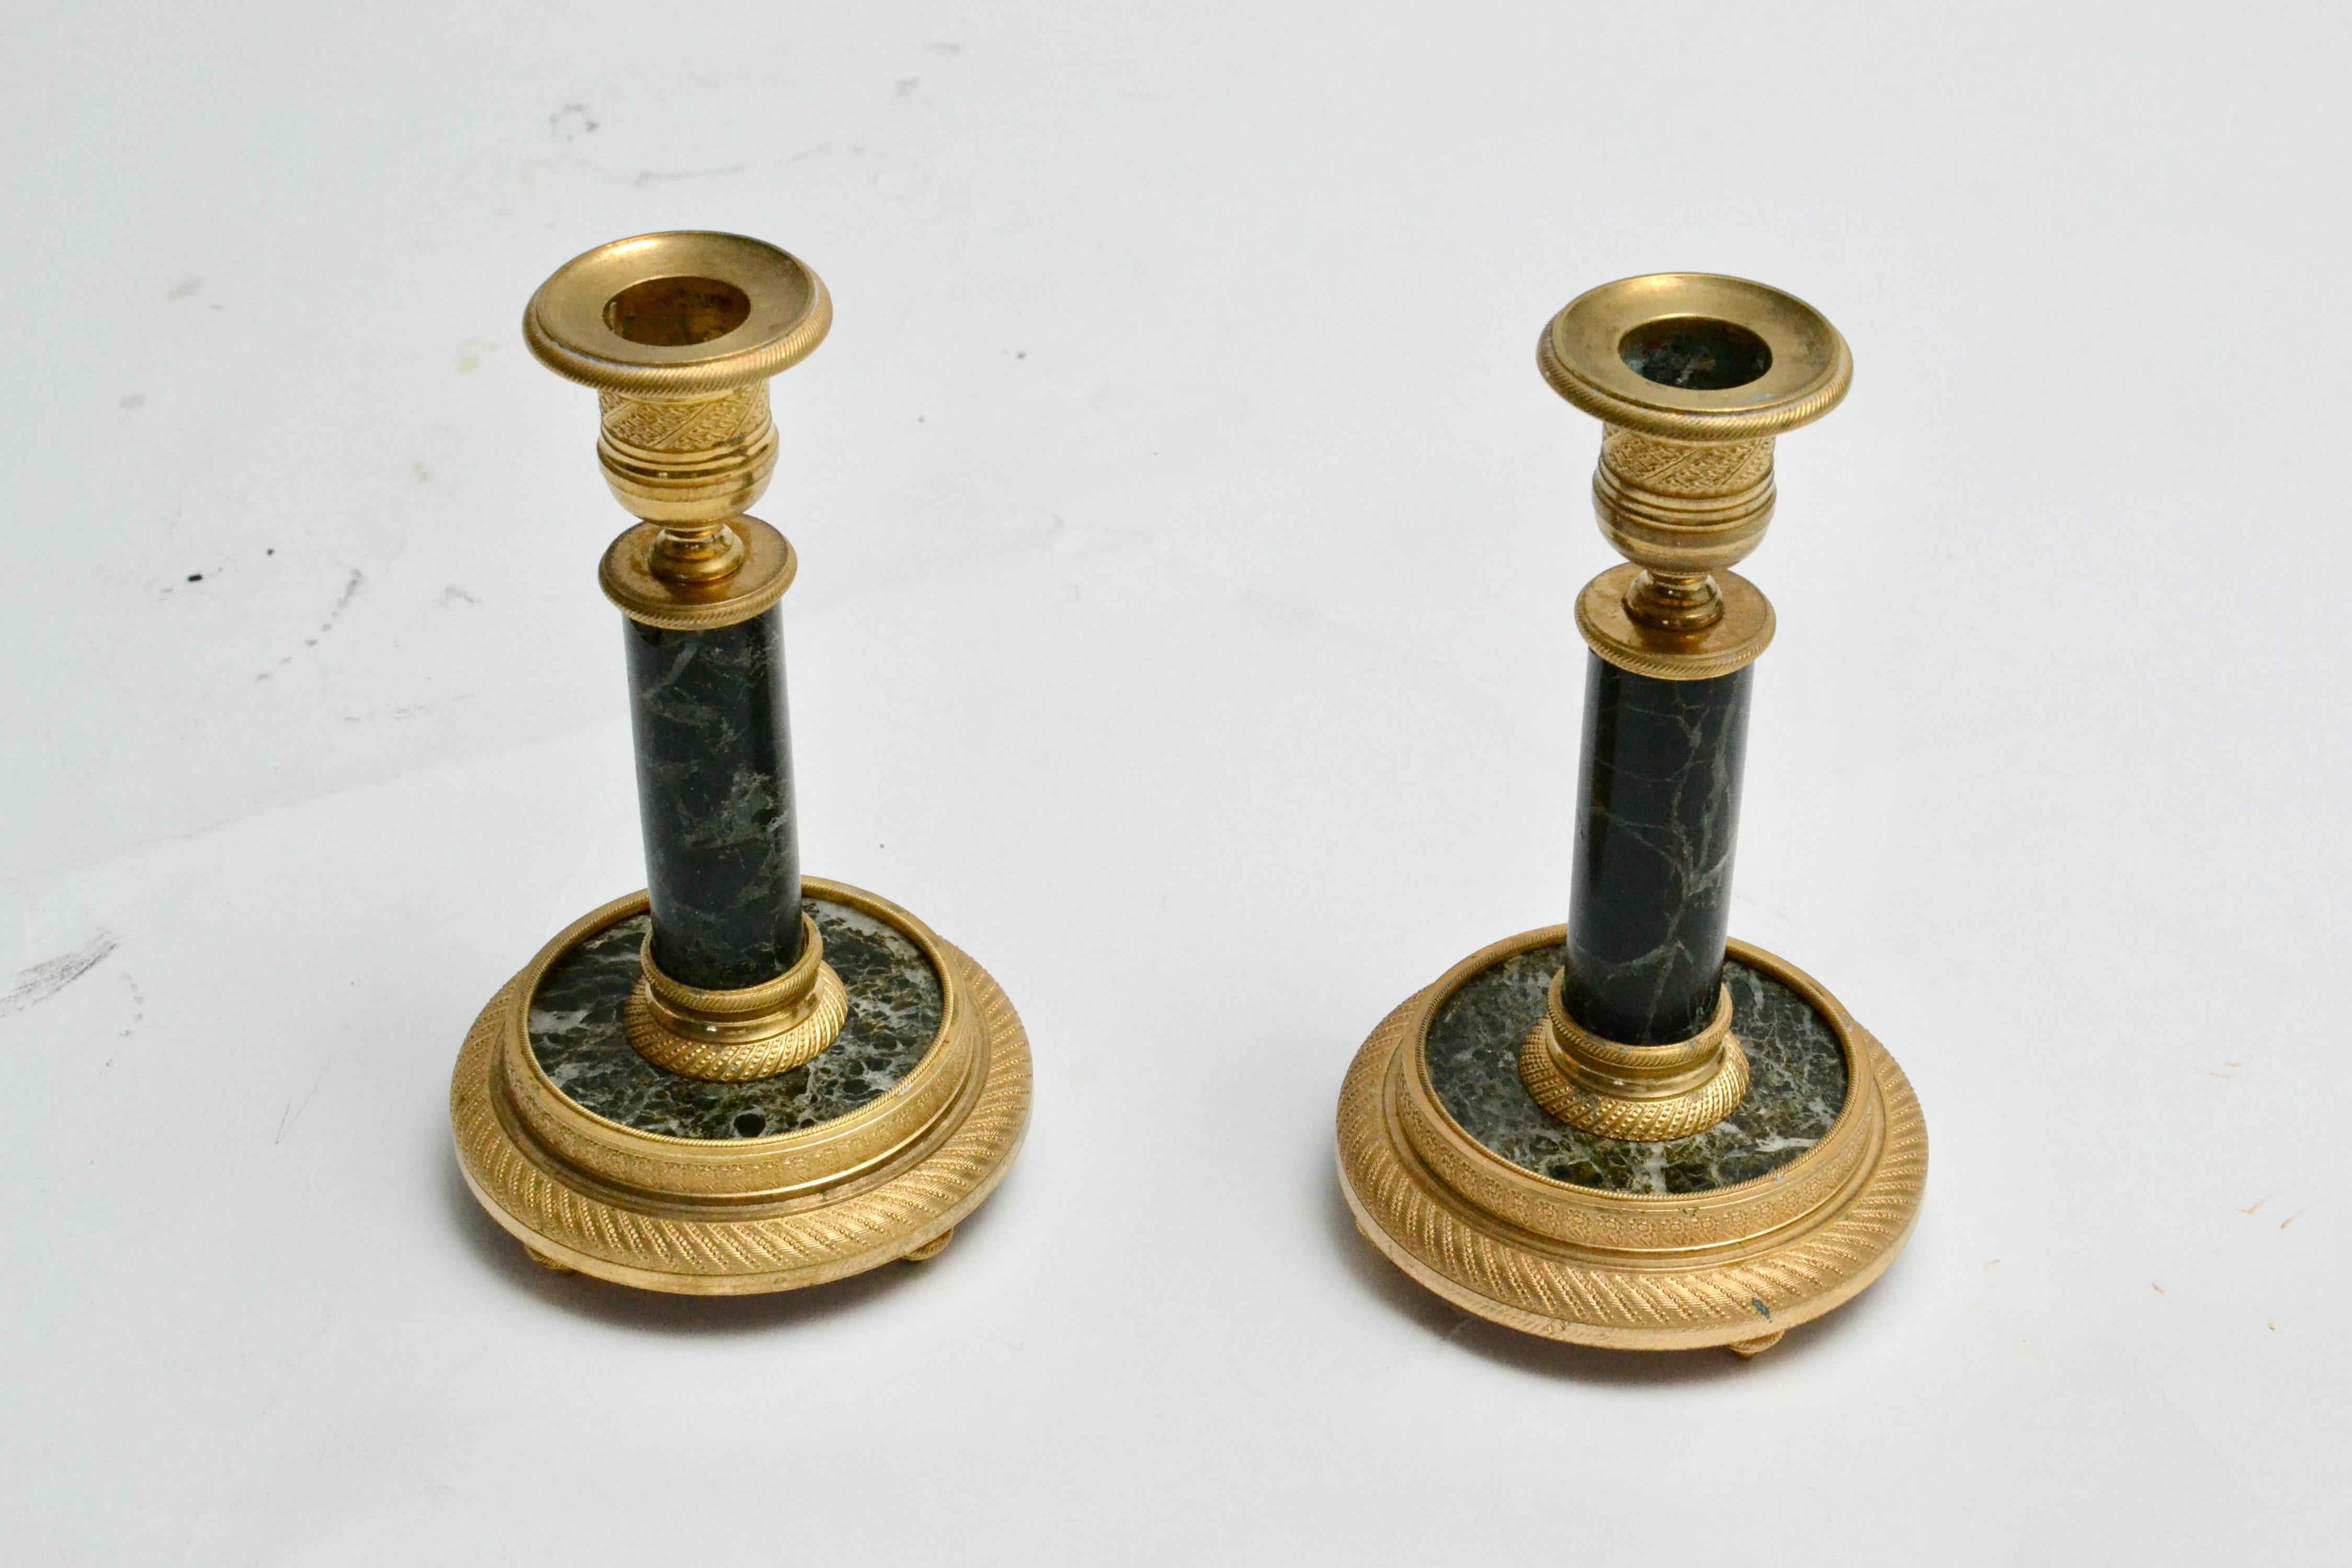 A decorative pair of empire style candlesticks in gilt bronze and dark green marble. France, end of the 19th century. Nice condition. 
